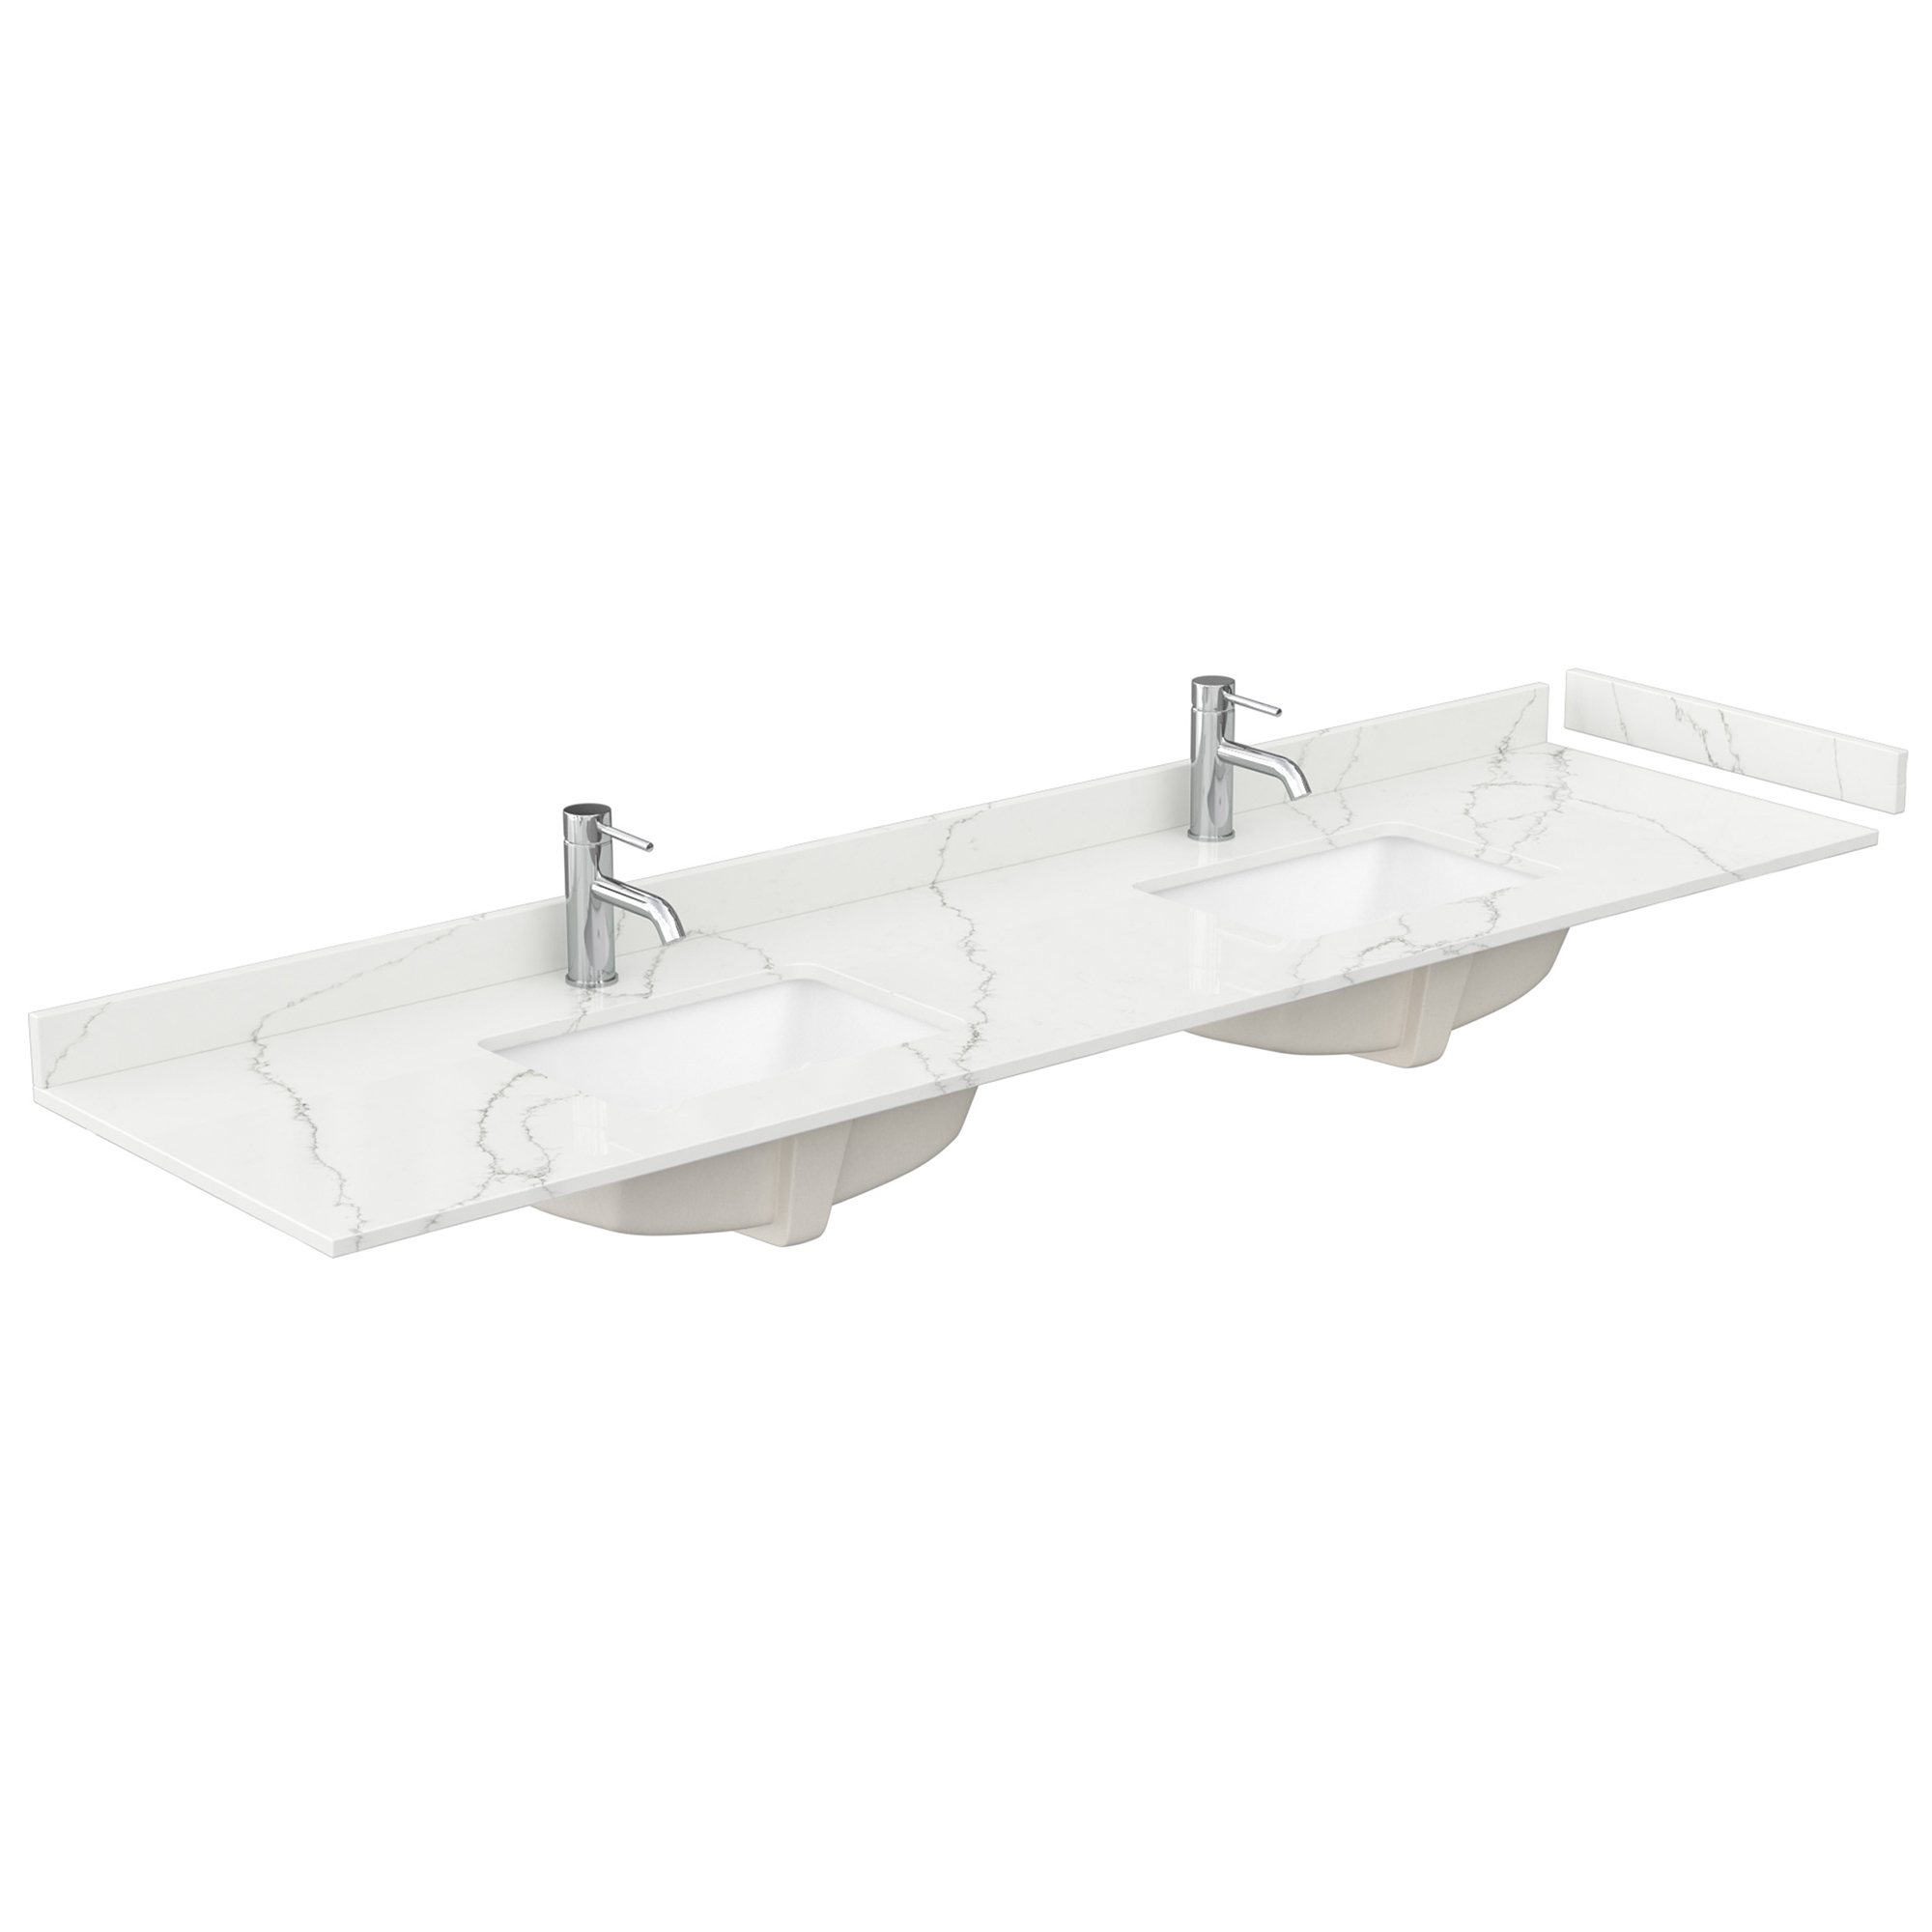 84" double countertop - giotto quartz (8066) with undermount square sinks (1-hole) - includes backsplash and sidesplash